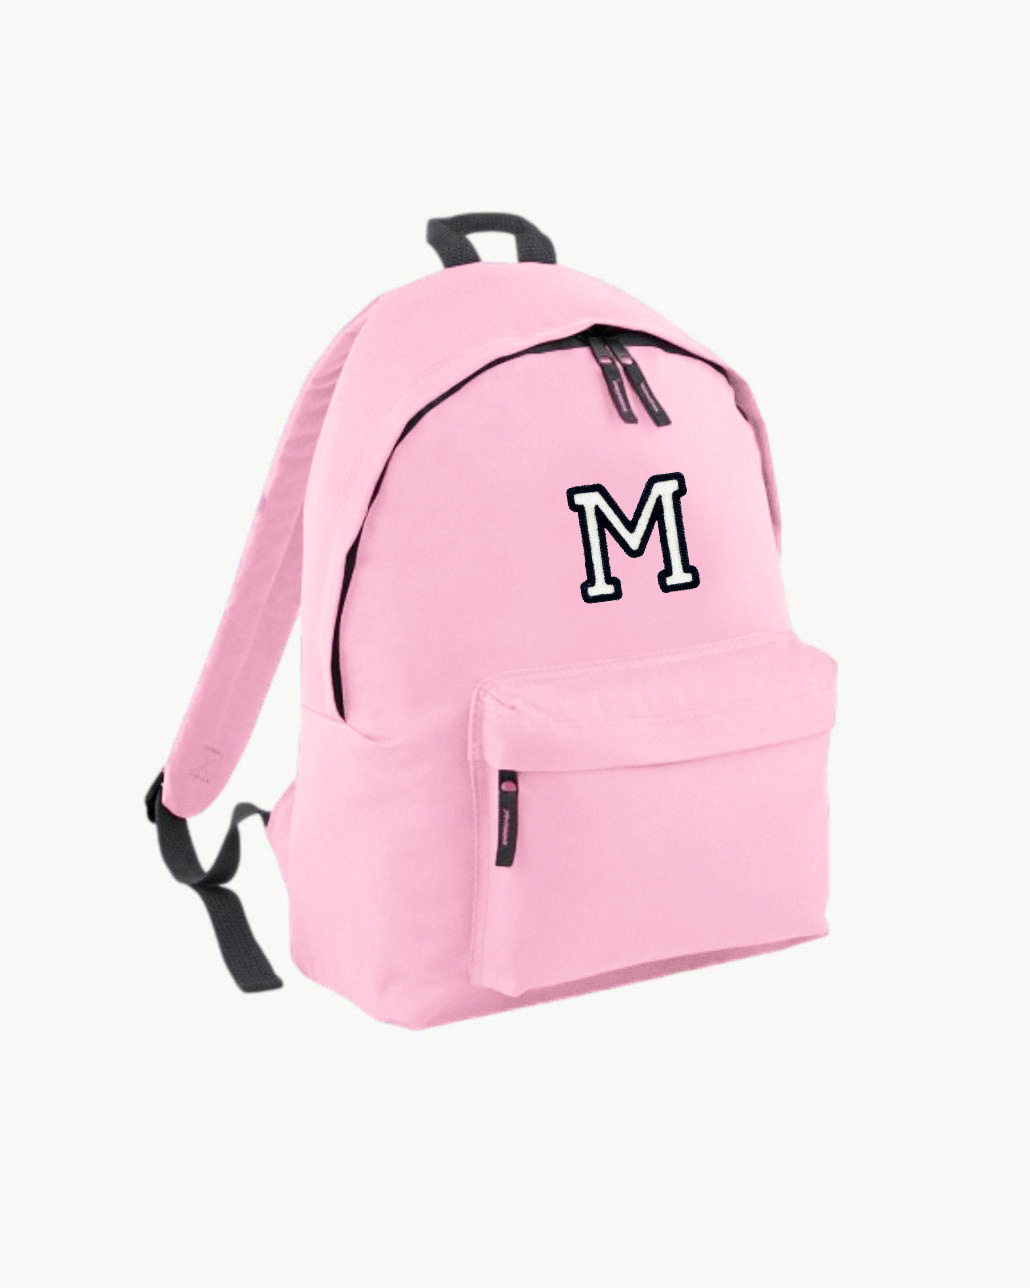 BACKPACK LIGHT PINK |  INICIAL MINI